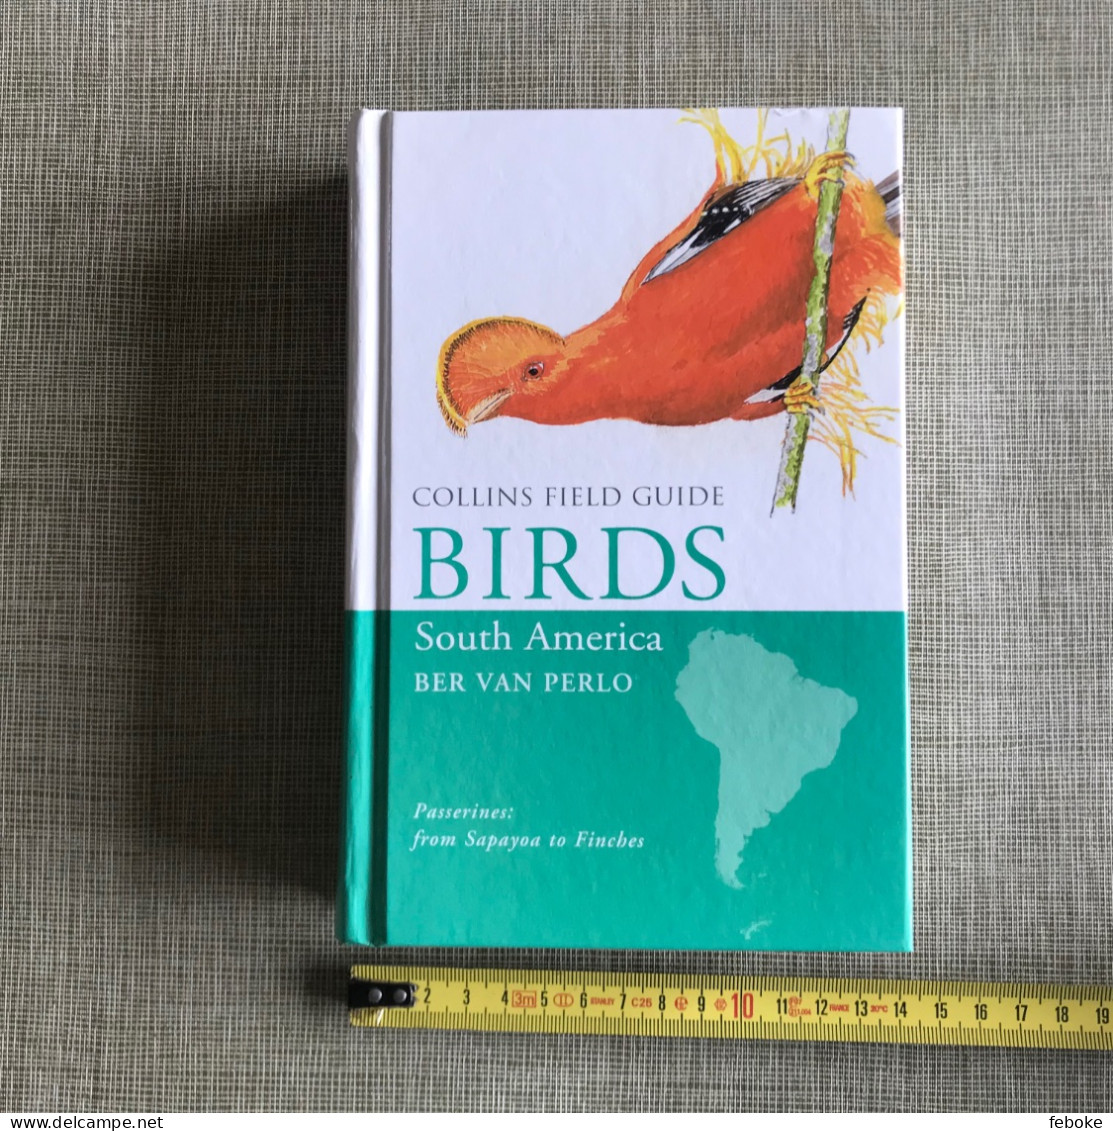 Collins Field Guide To The Birds Of South America: Passerines: From Sapayoa To Finches 2015 - Wildlife